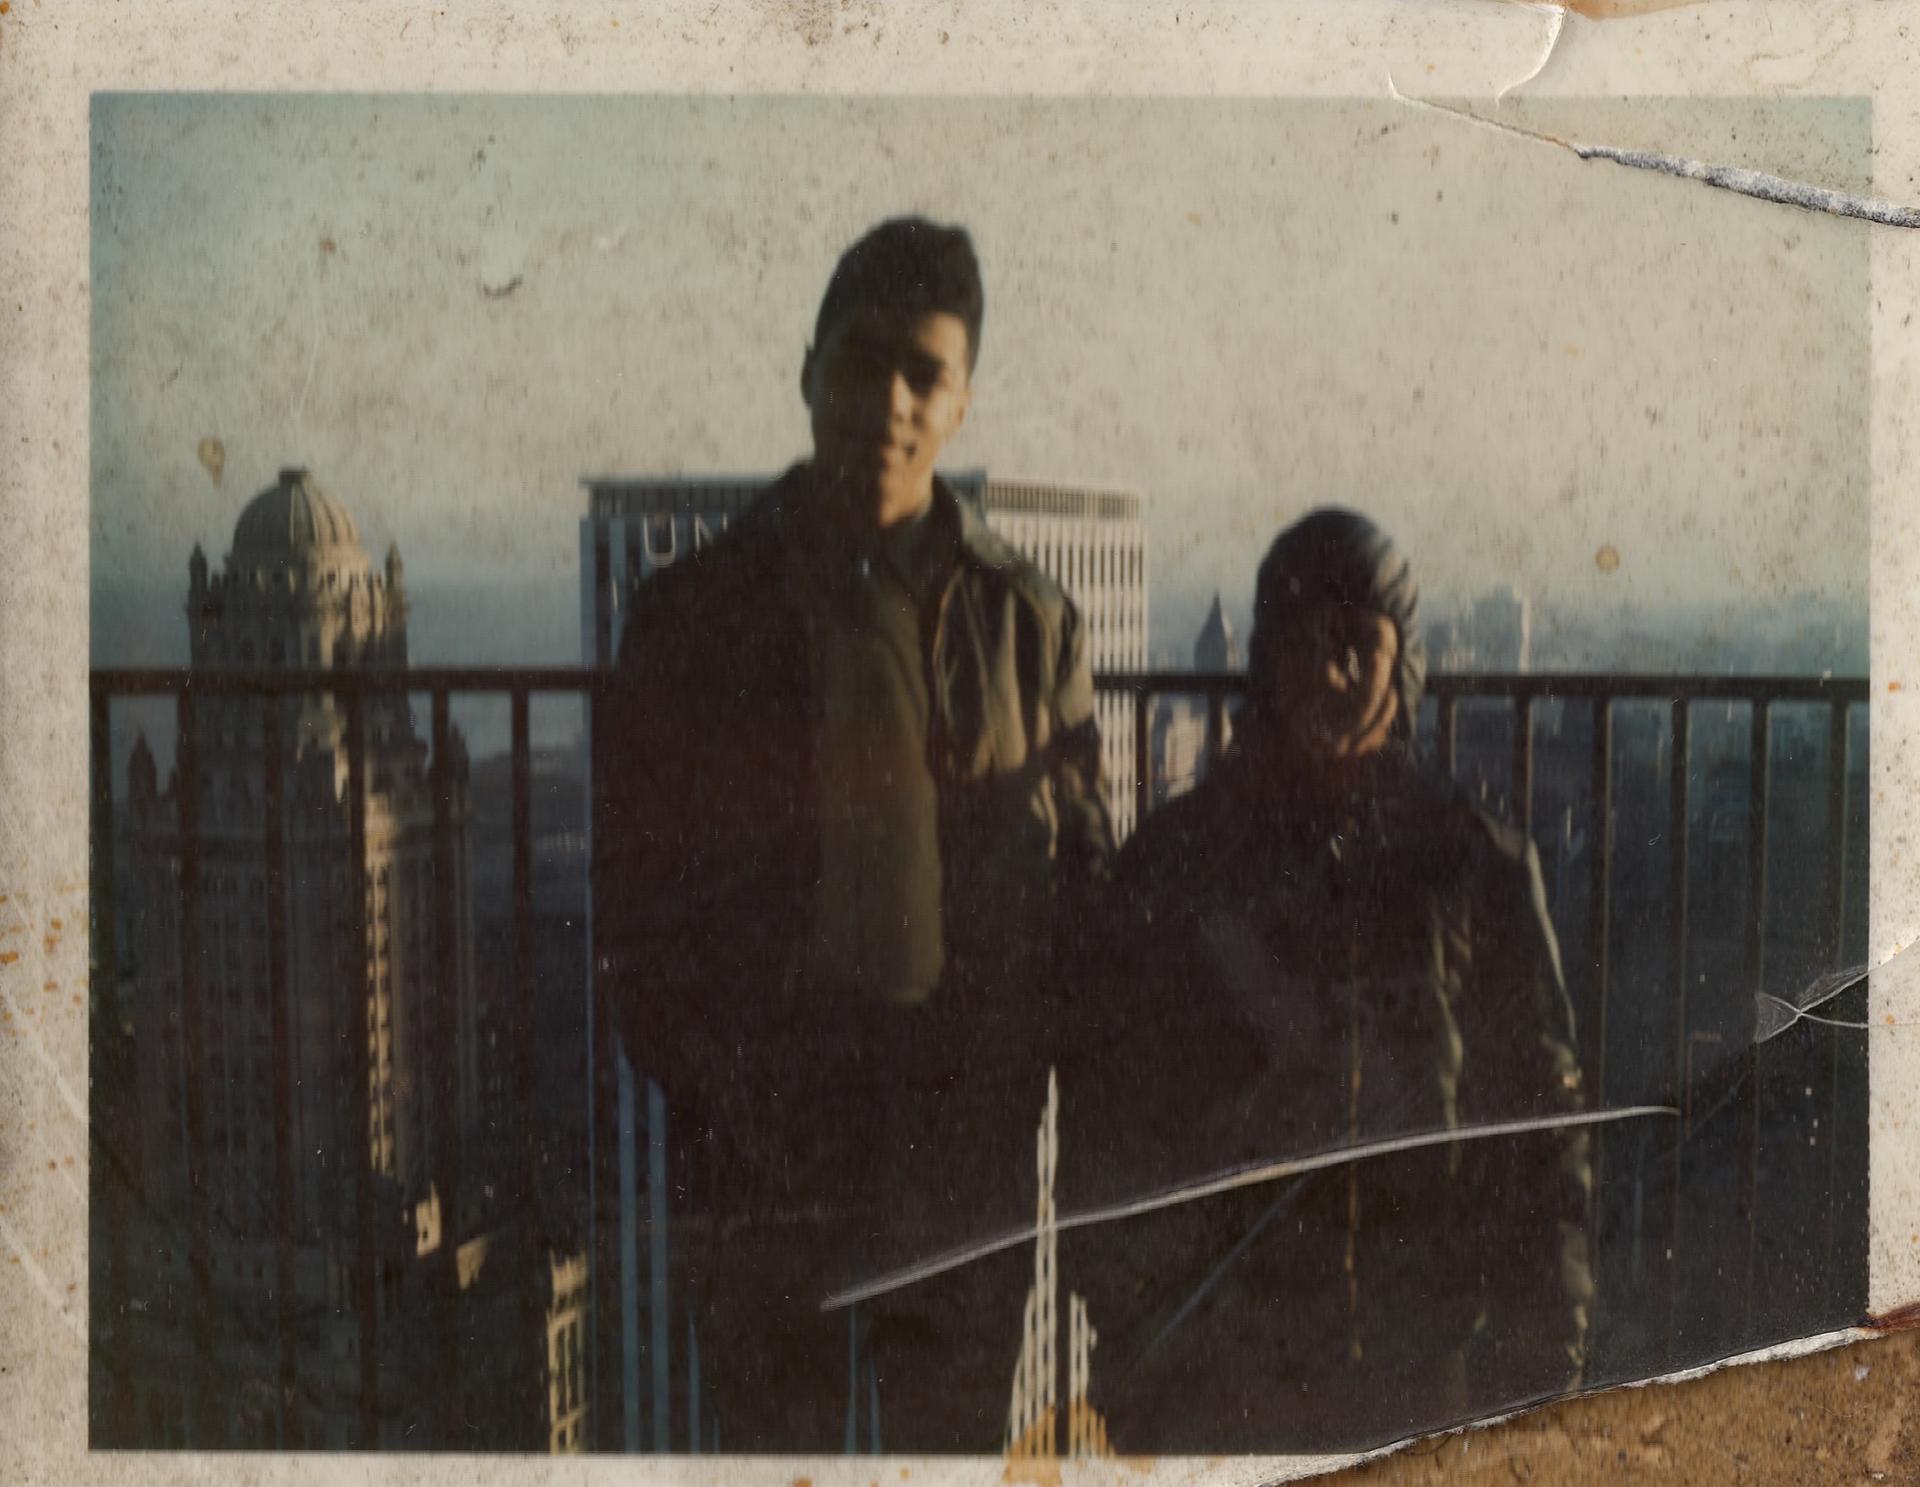 Former Marina City paperboy Robin Washington, right, and his brother Glen on an East Tower balcony in the late 1960s, when the buildings dominated Chicago's skyline.